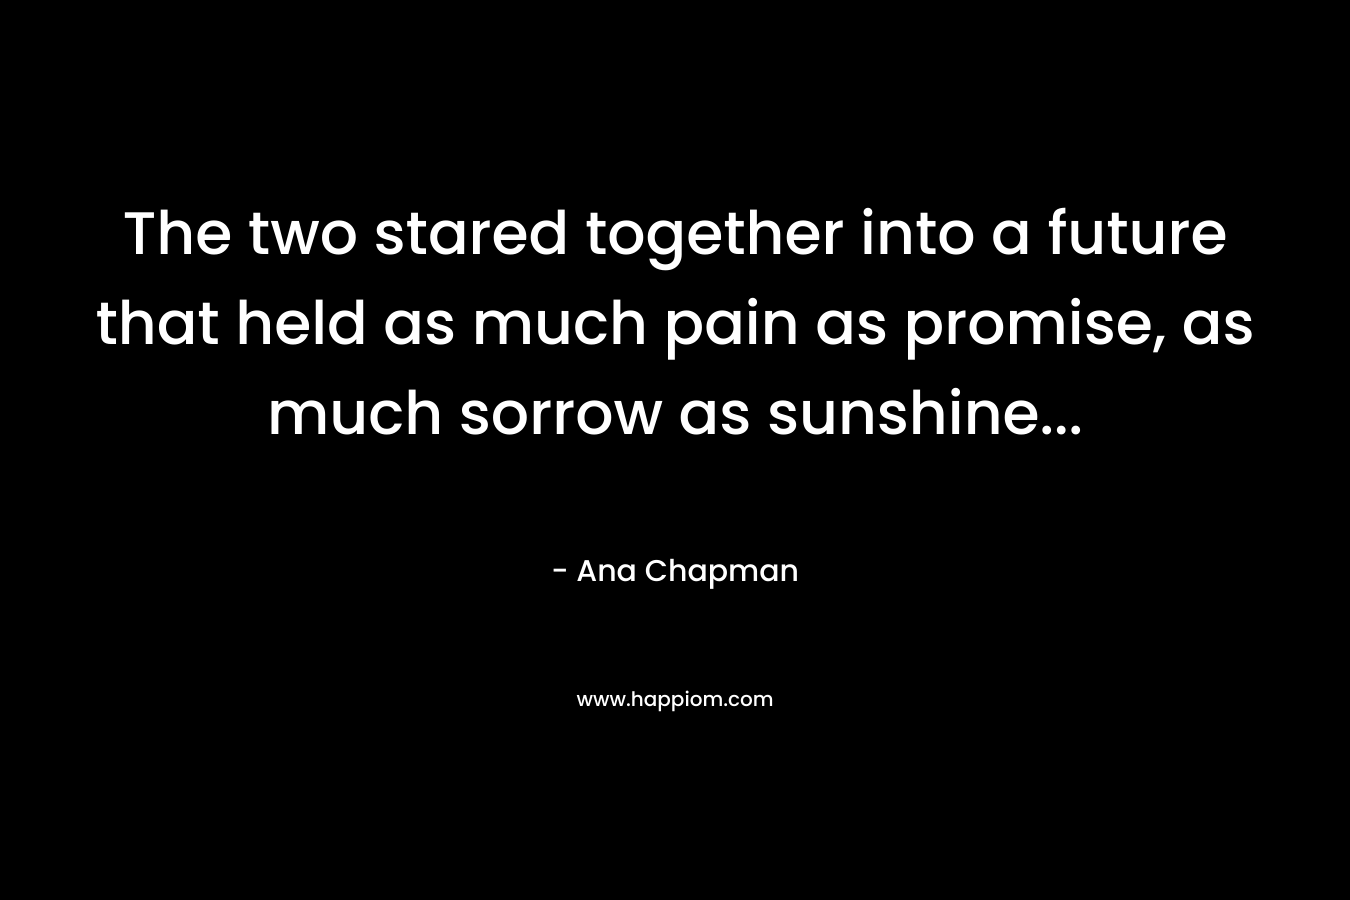 The two stared together into a future that held as much pain as promise, as much sorrow as sunshine… – Ana Chapman